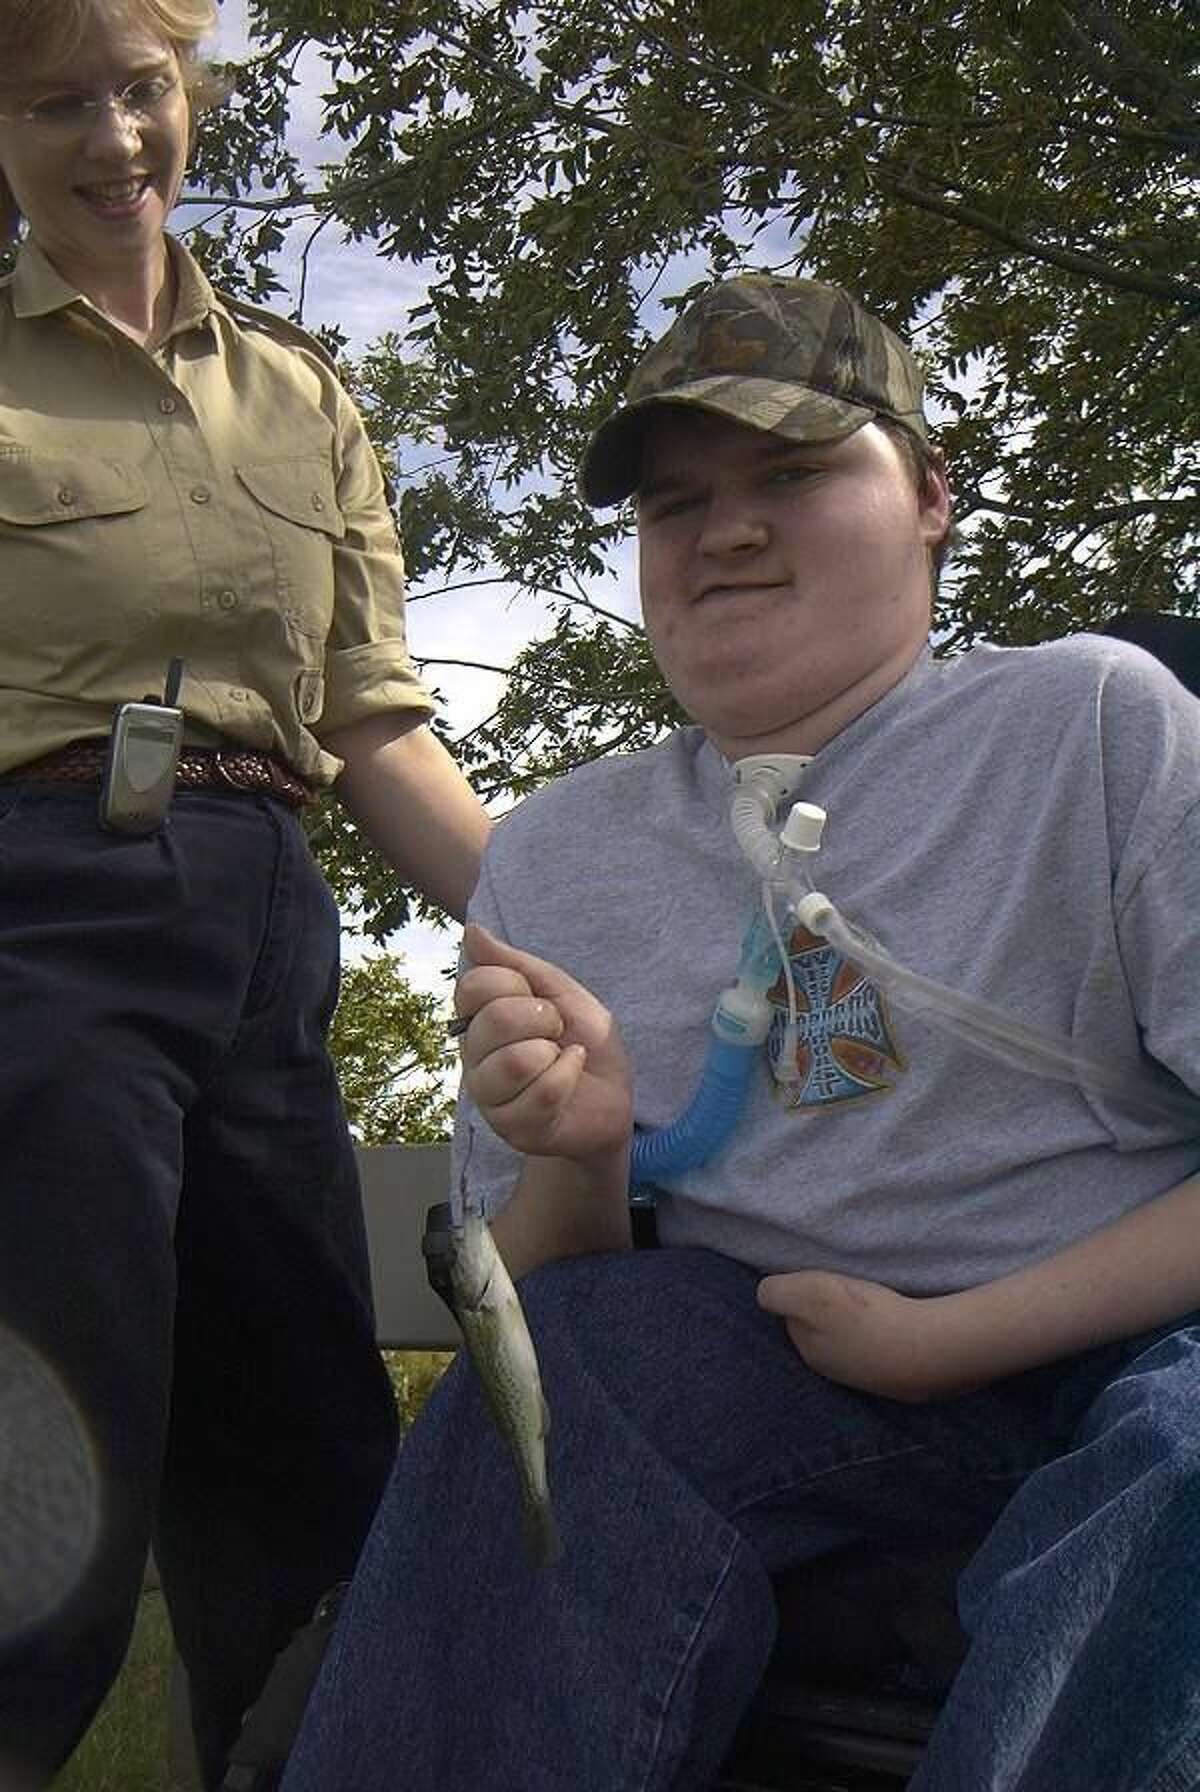 Diagnosed with a rare form of muscular dystrophy, Jeffrey Pruett has overcome mountains and has inspired many with his love for life.